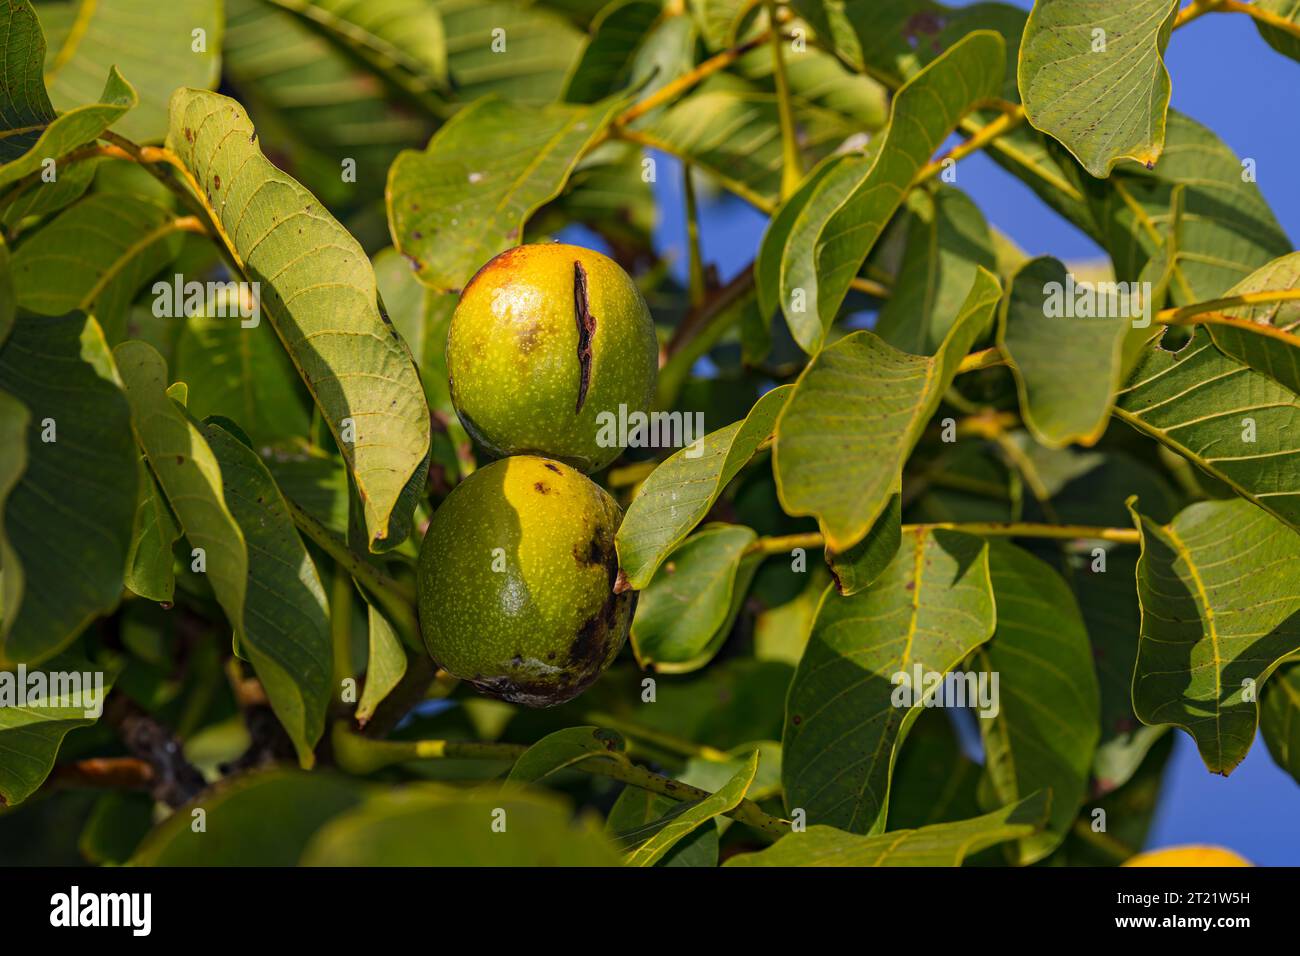 Close up of two walnuts on walnut tree with green leaves against blue sky Stock Photo